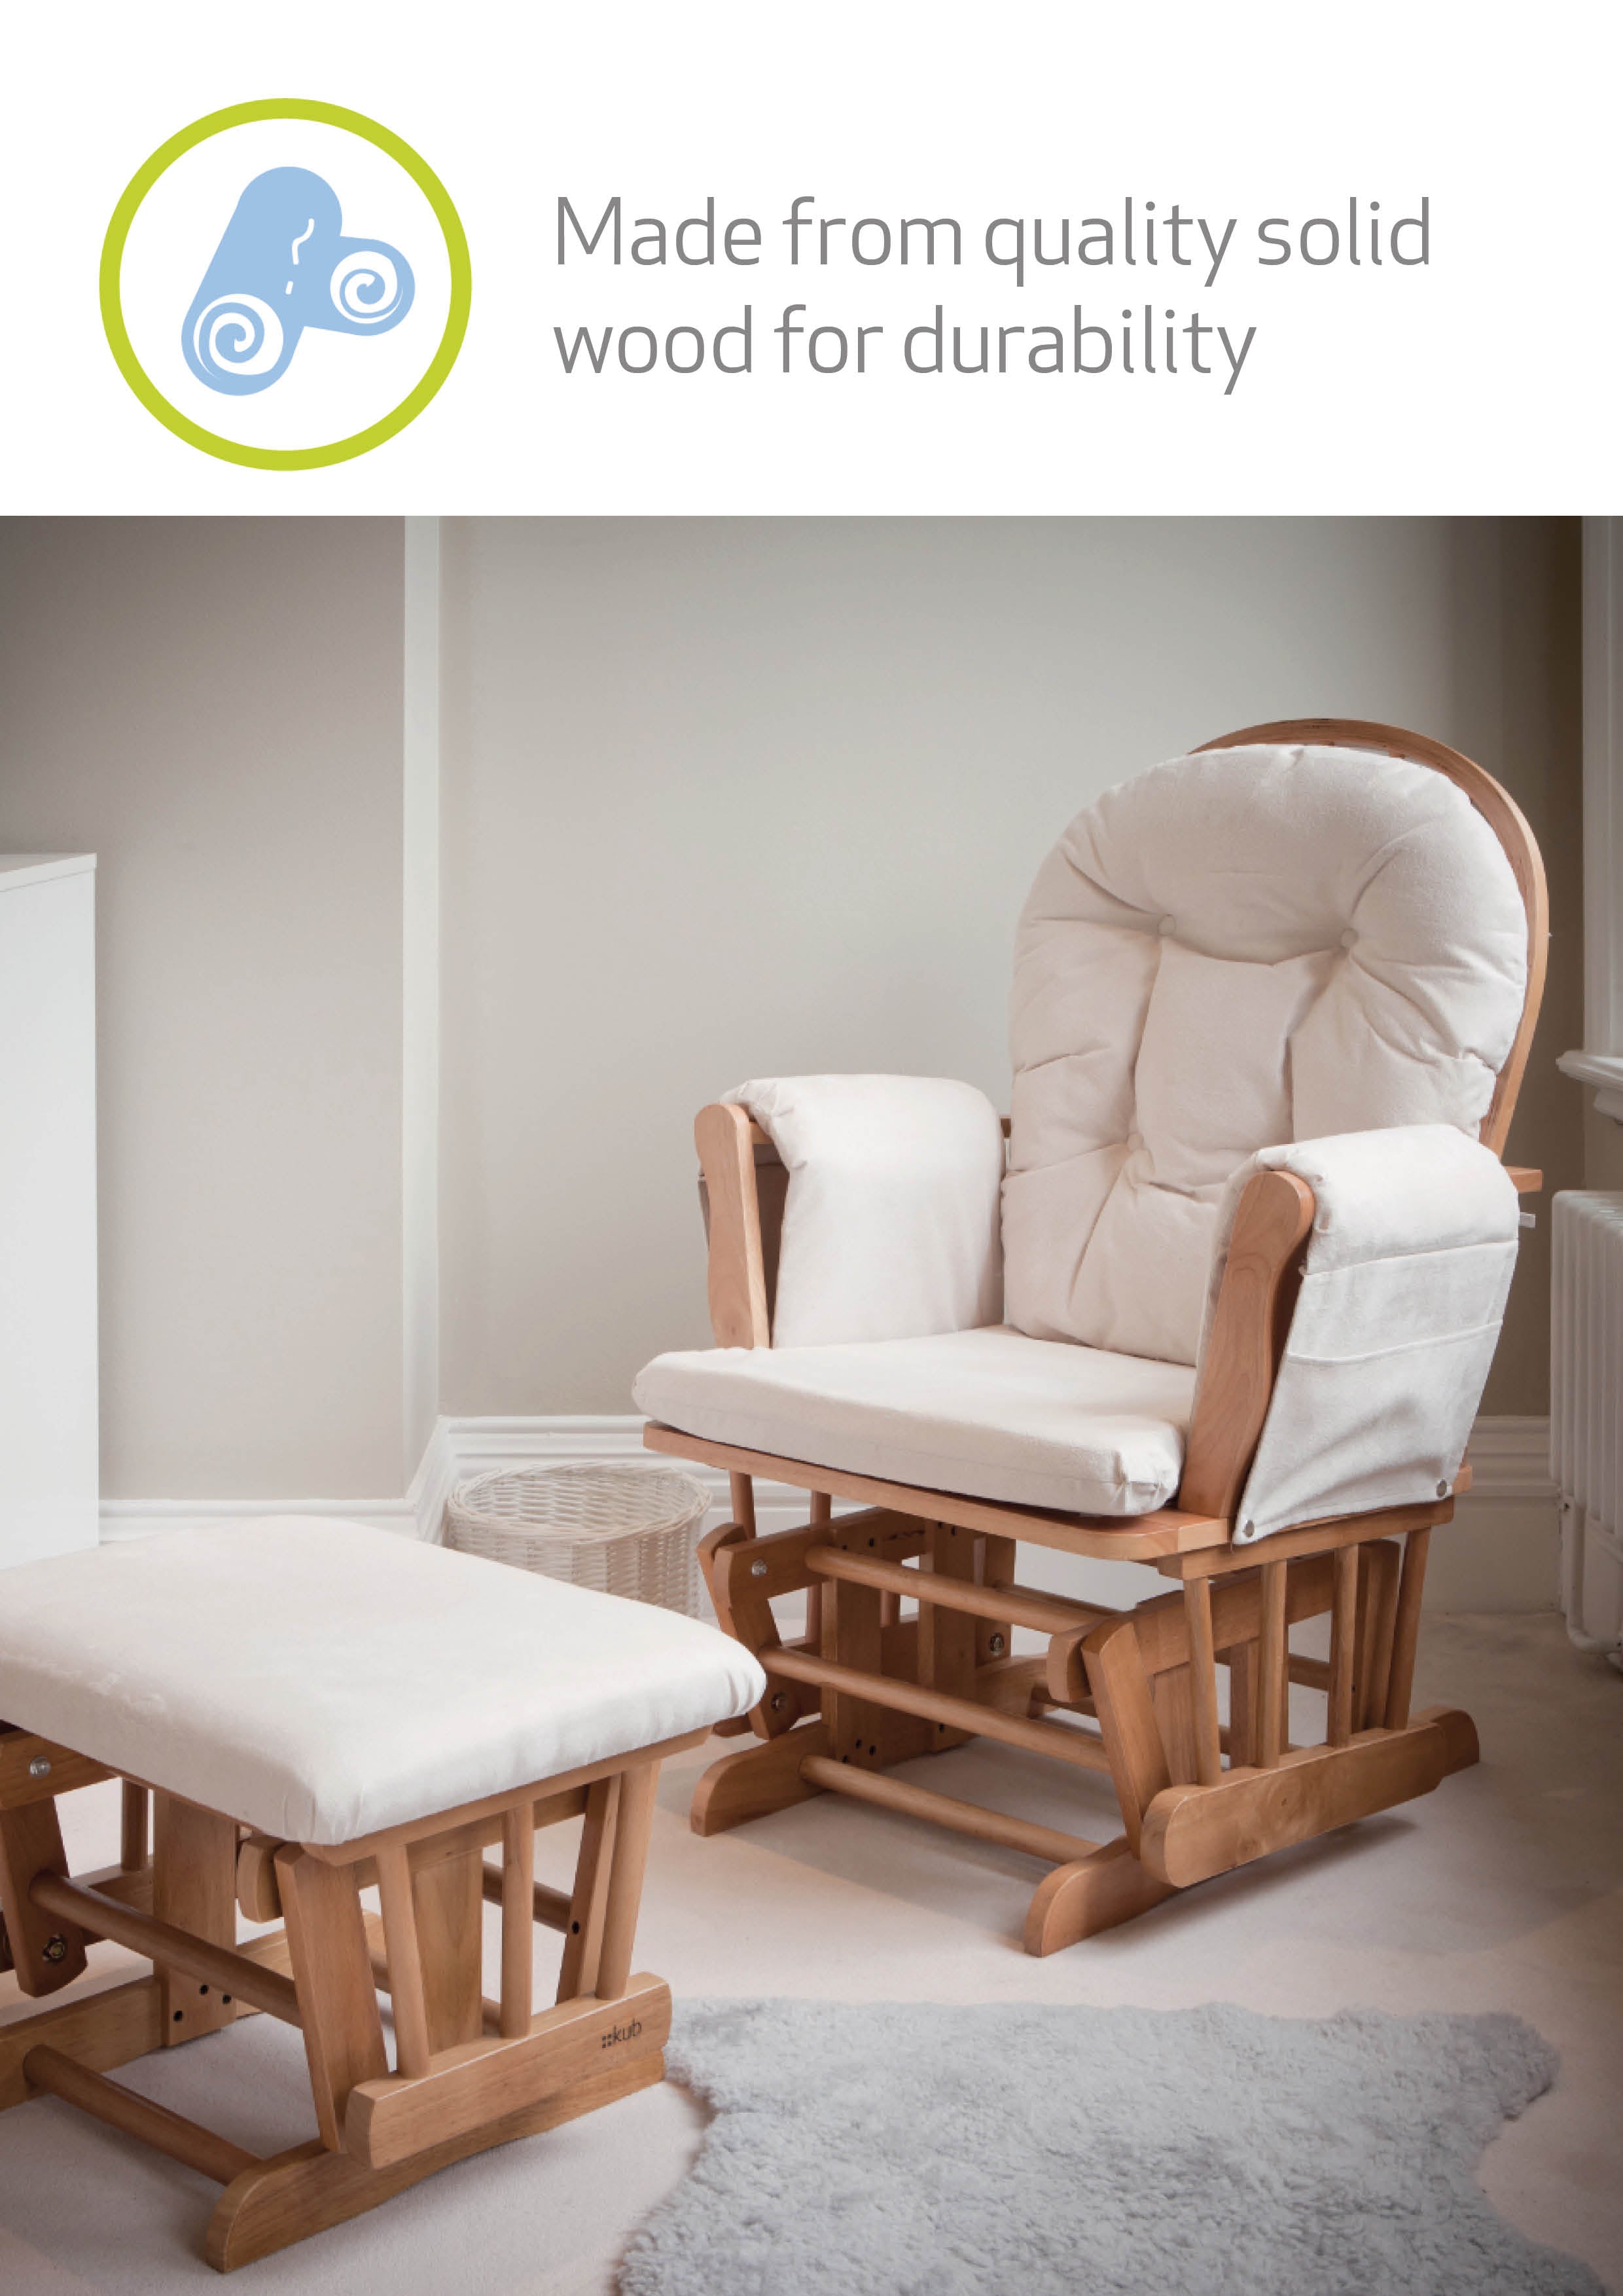 Haywood Nursing Chair and Footstool White and Beige